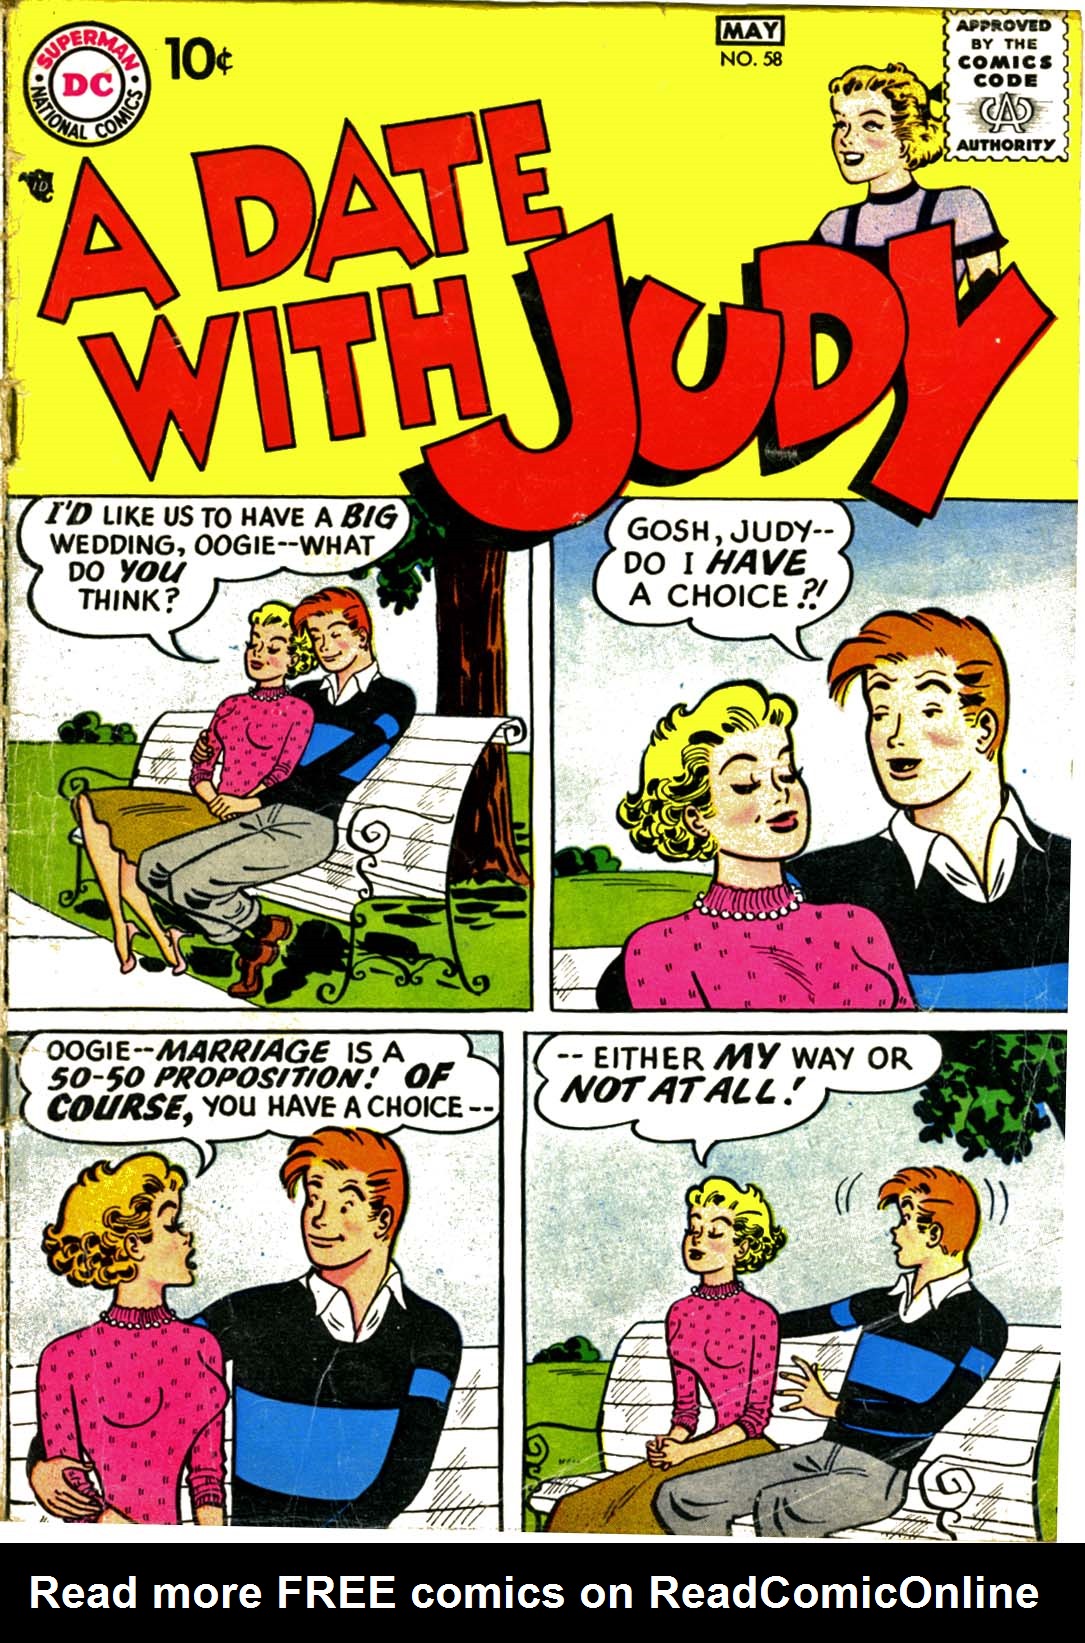 Read online A Date with Judy comic -  Issue #58 - 1